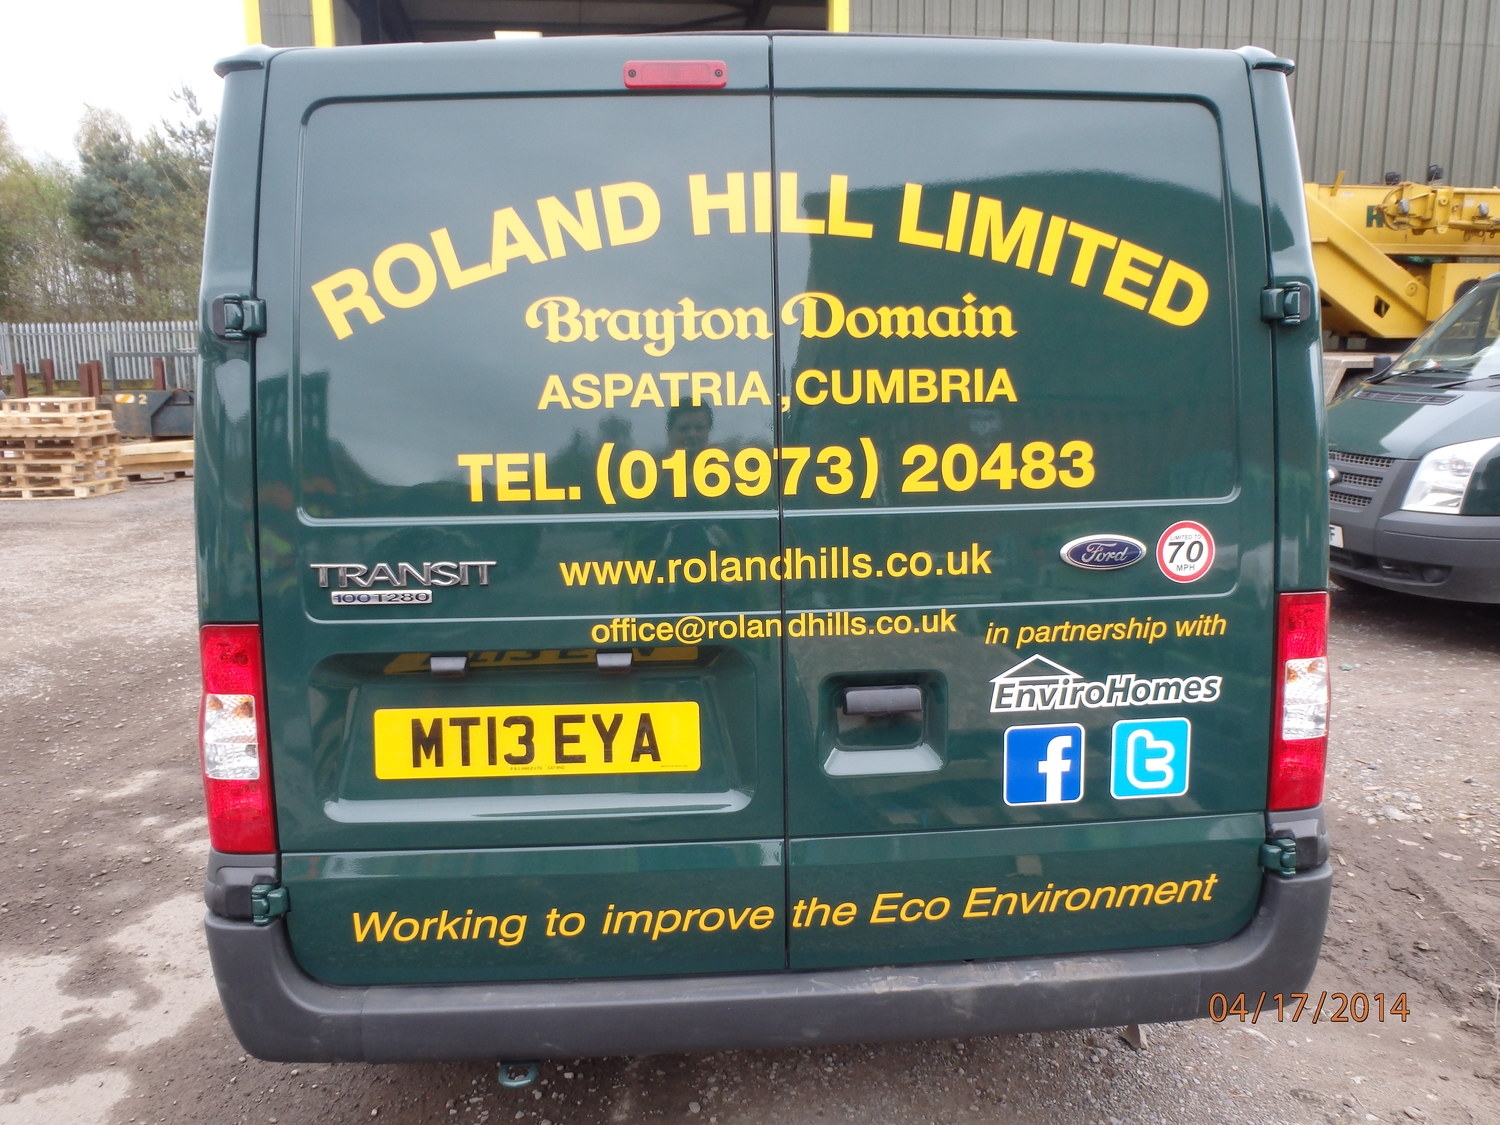 The new logos added to the back of the van